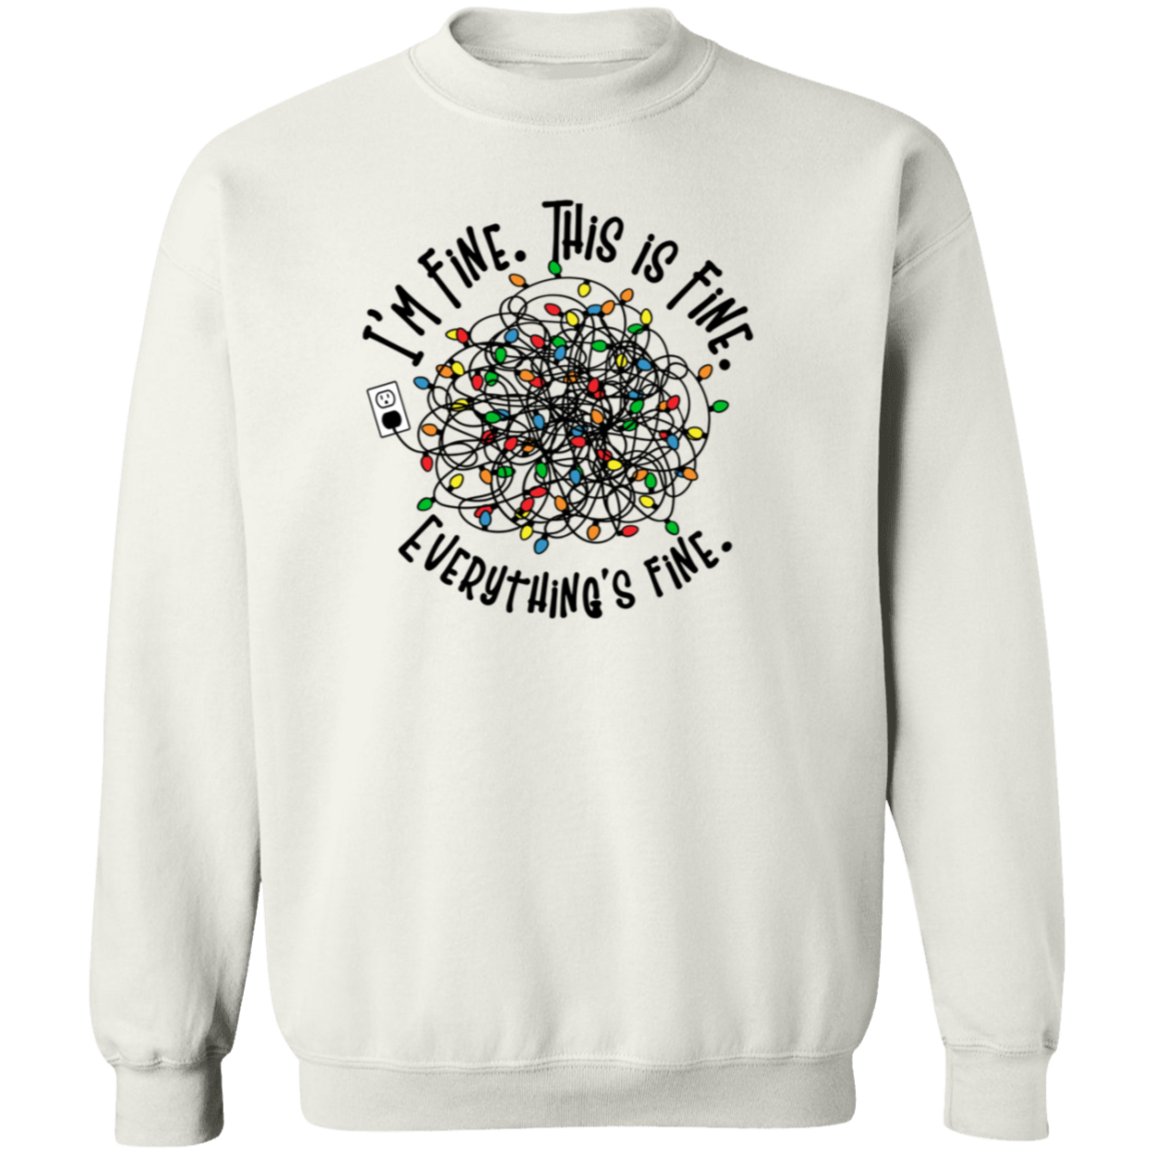 I'm Fine, This Is Fine, Everything Is Fine - Unisex Ugly Sweatshirt, Christmas, Winter